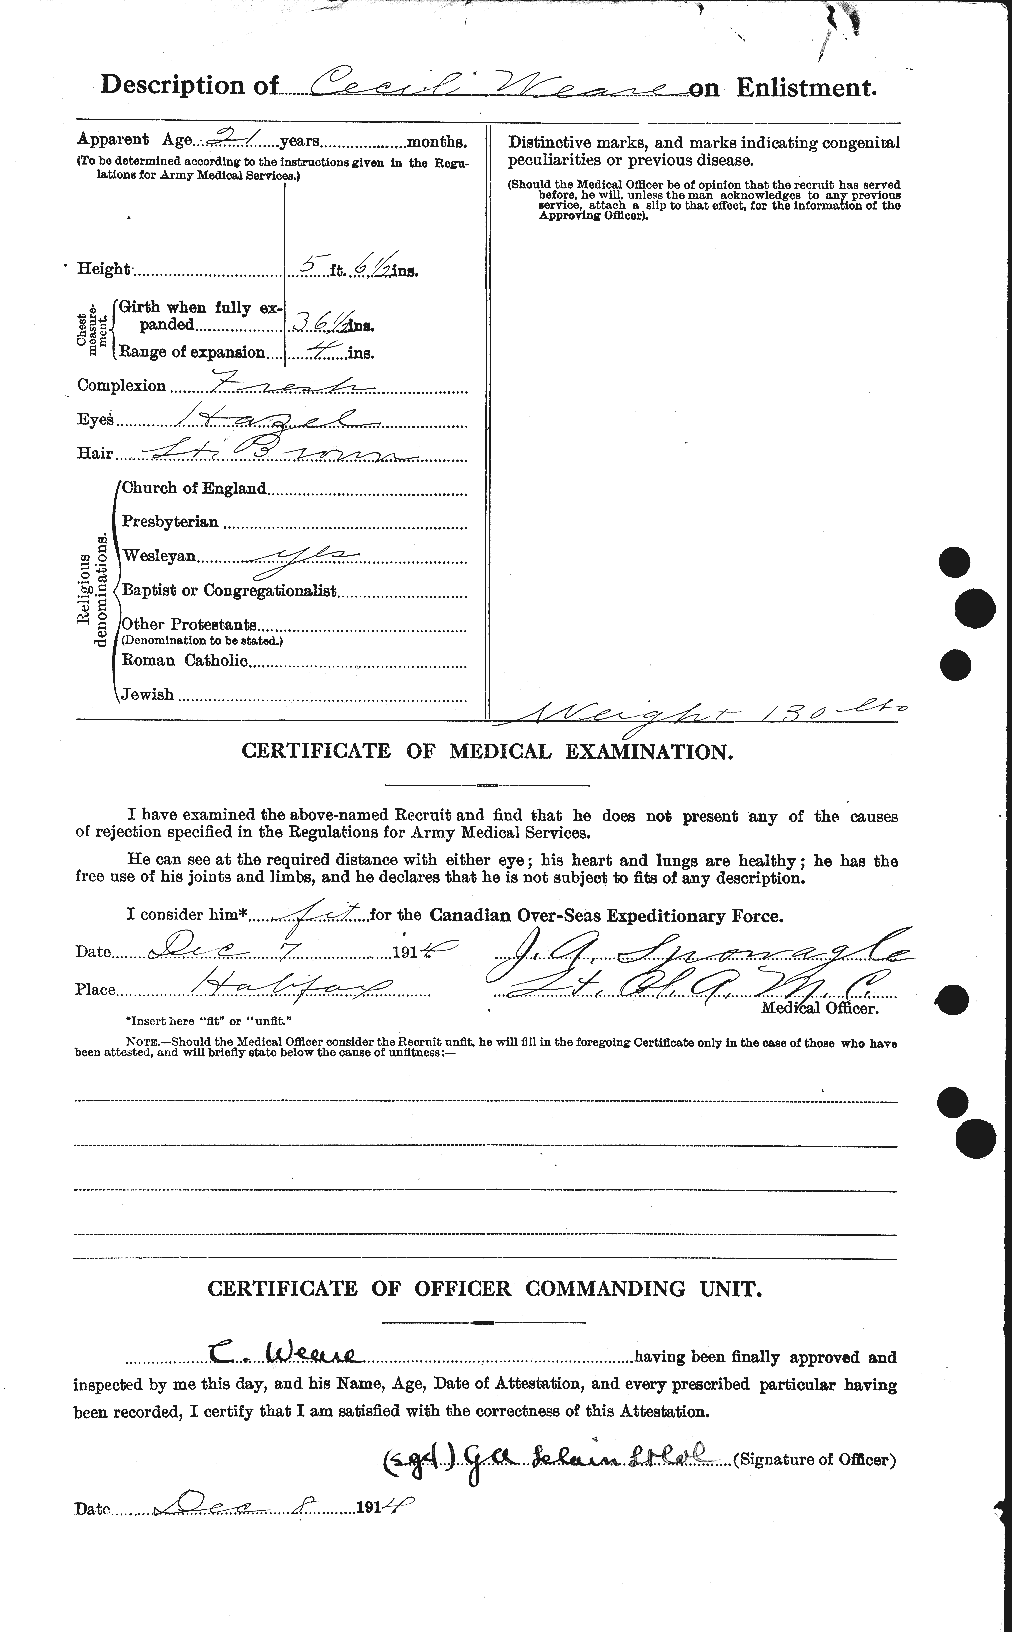 Personnel Records of the First World War - CEF 664109b